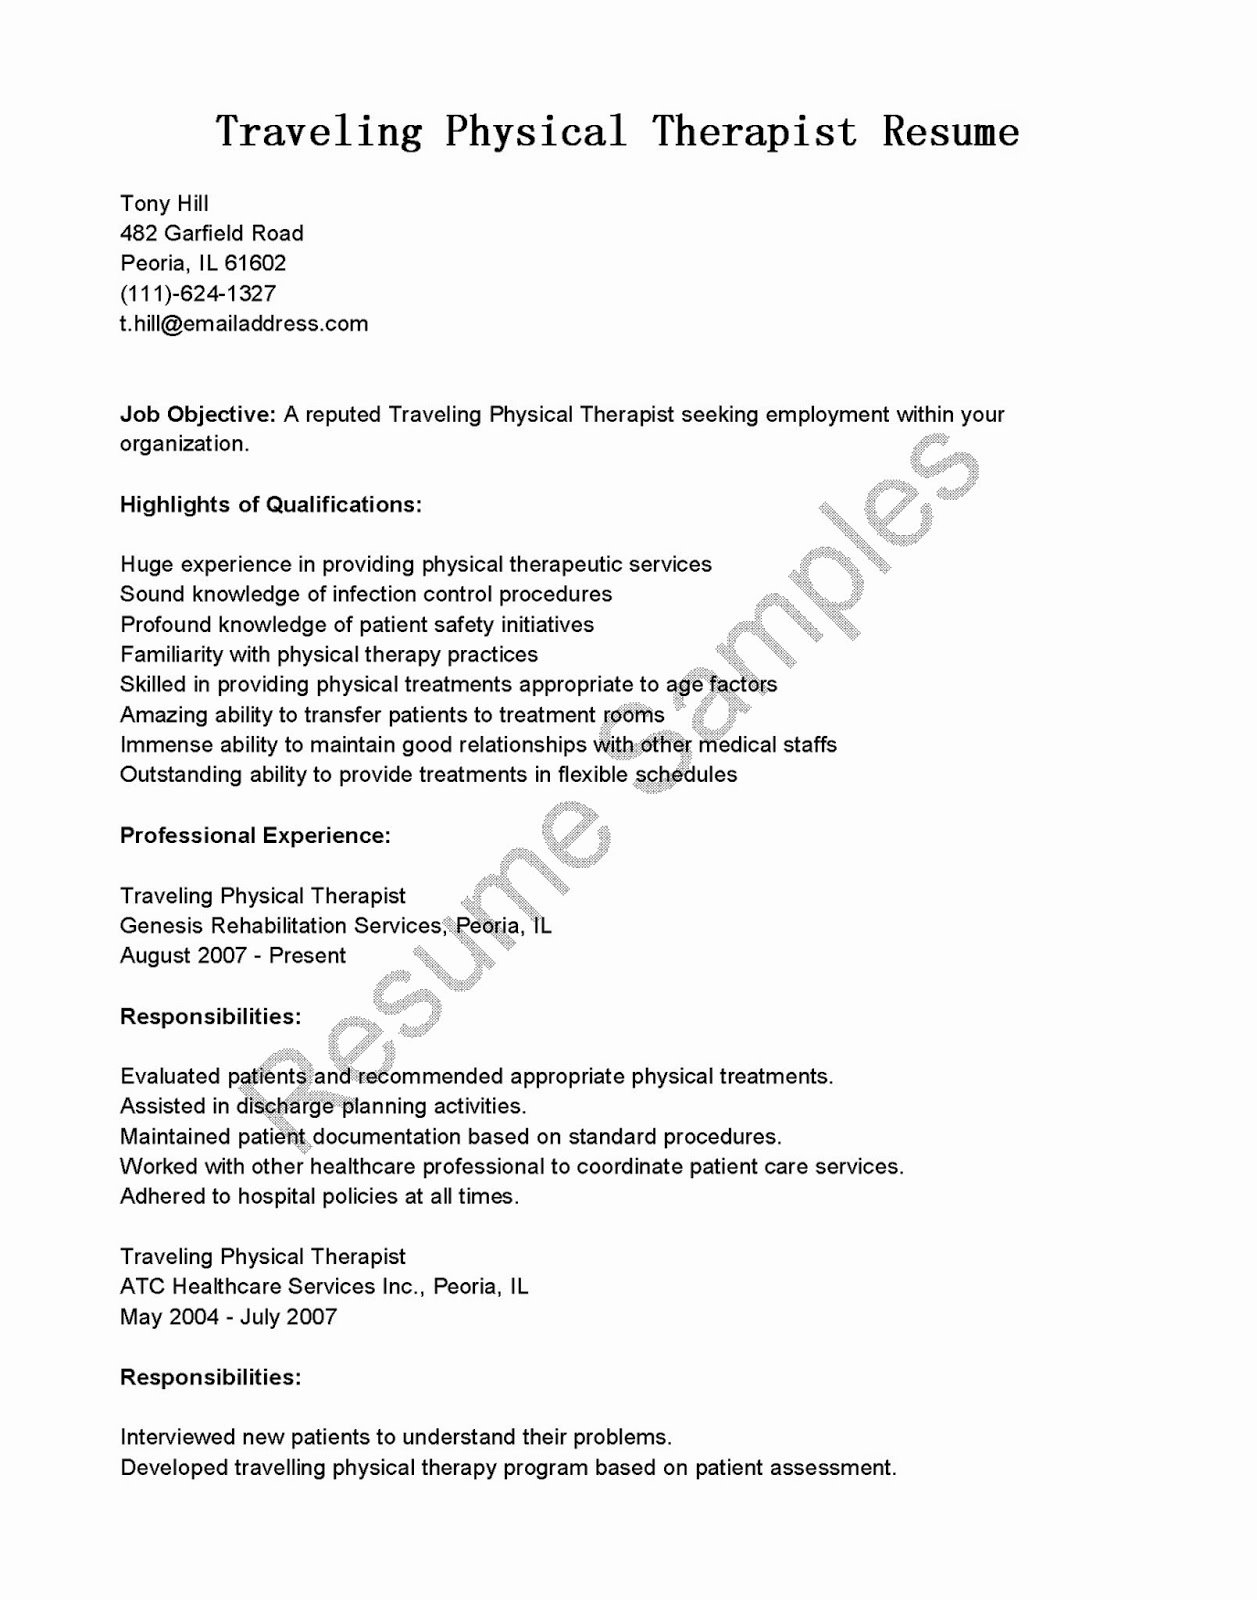 Physical Therapy Resume Template